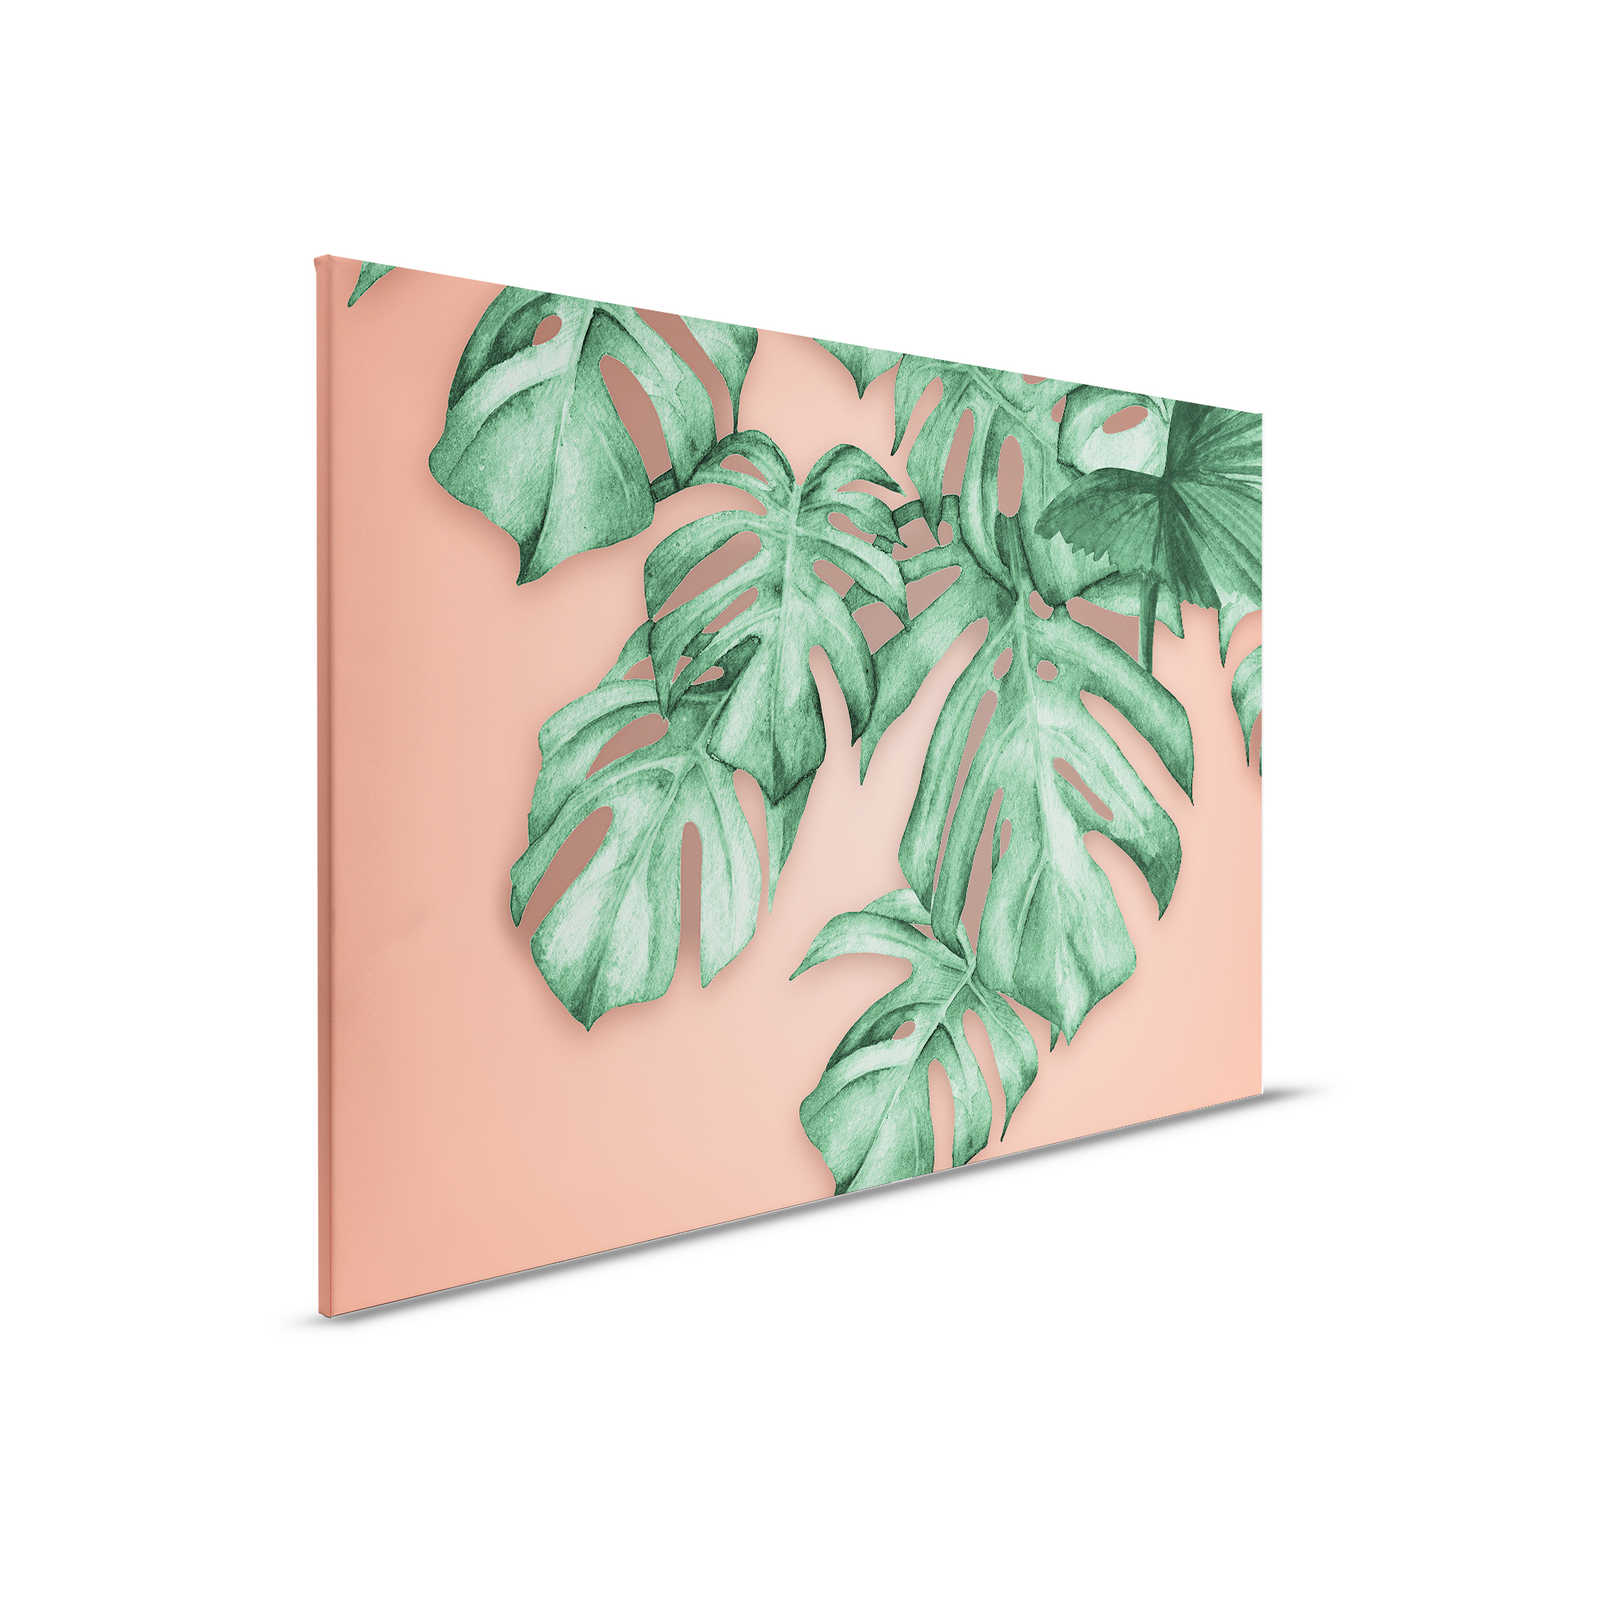 Canvas painting with tropical palm leaves - 0.90 m x 0.60 m
